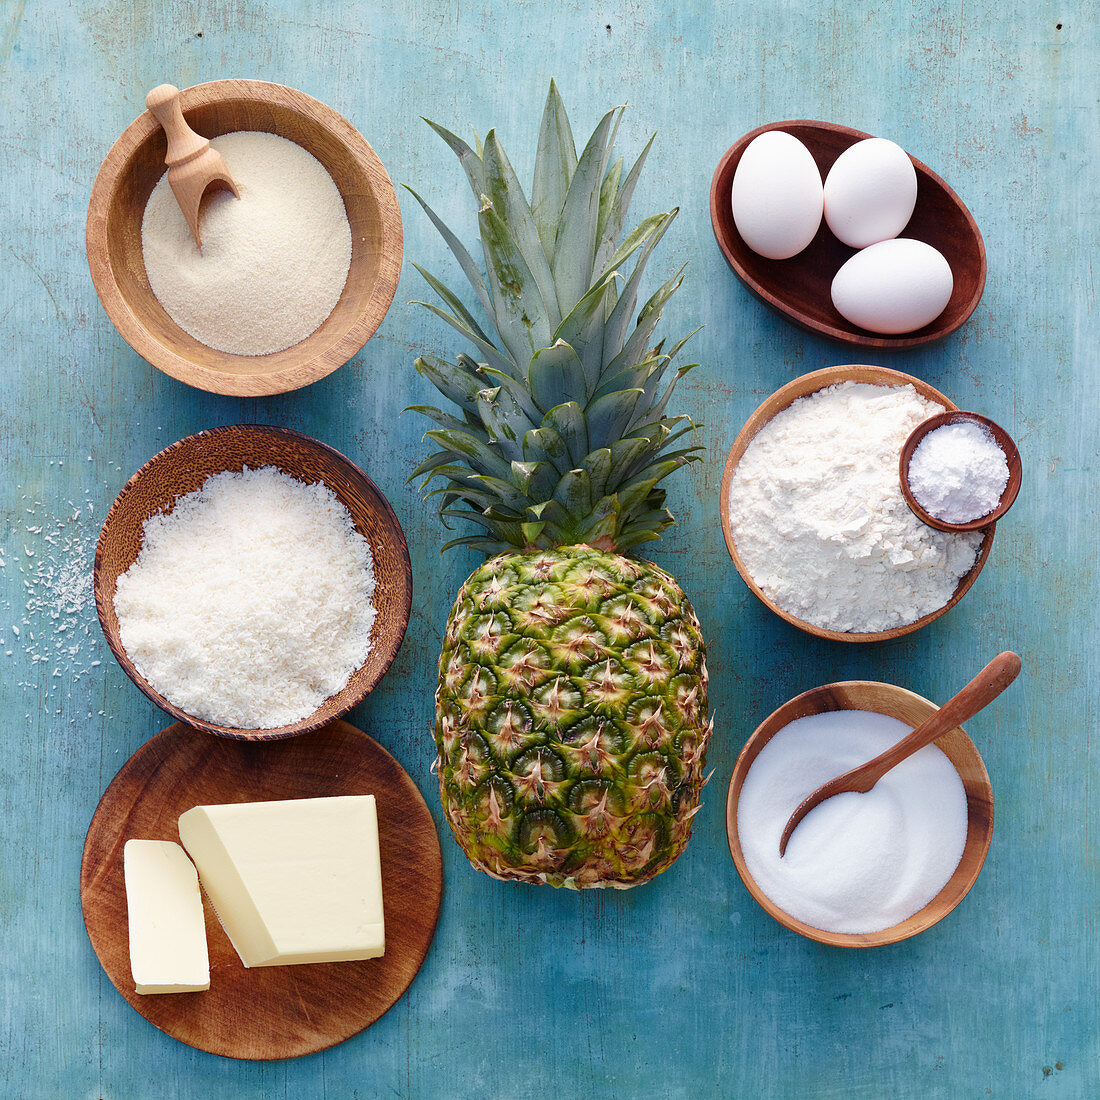 Ingredients for a pineapple upside down cake